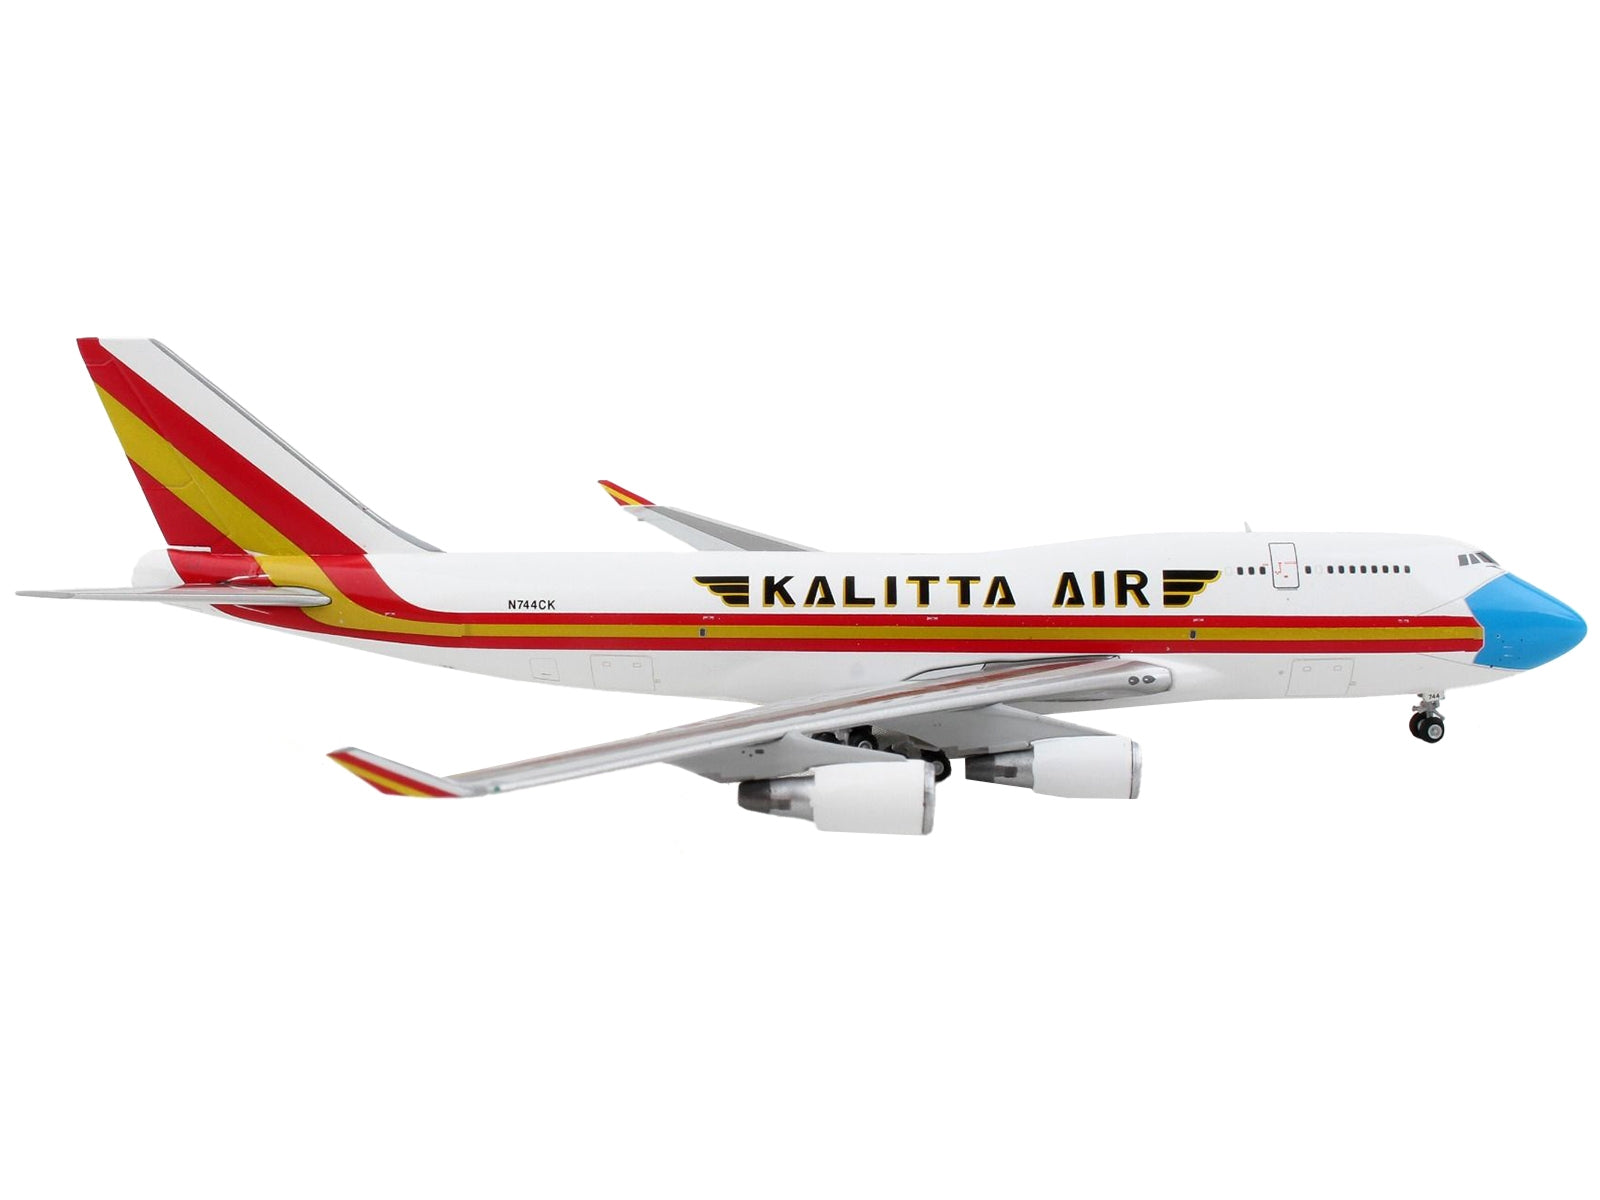 Boeing 747-400F Commercial Aircraft "Kalitta Air" White with Stripes "Mask" Livery 1/400 Diecast Model Airplane by GeminiJets